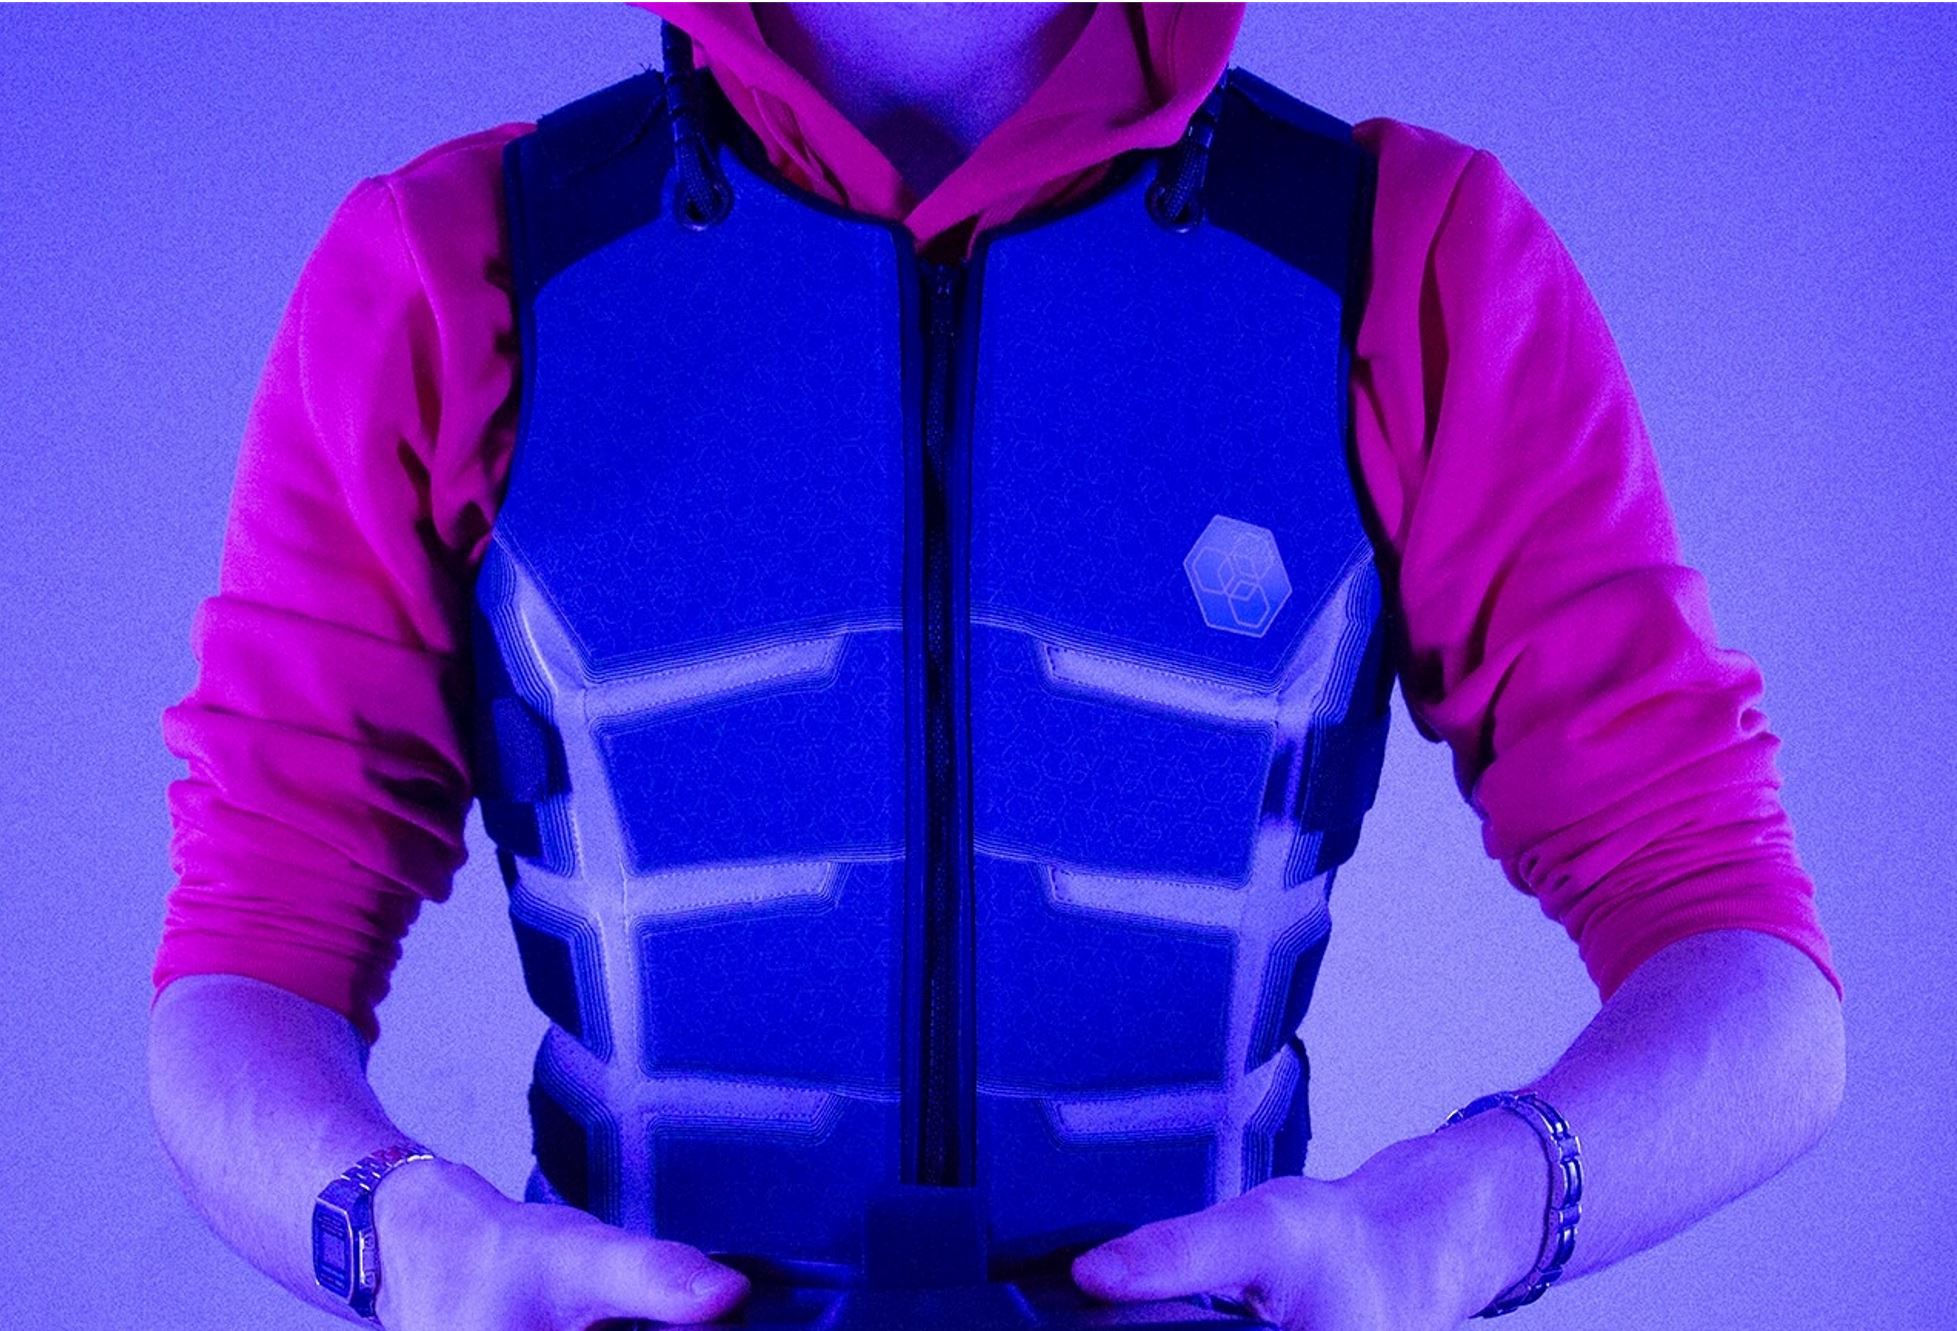 Tactile jacket for CES 2022?